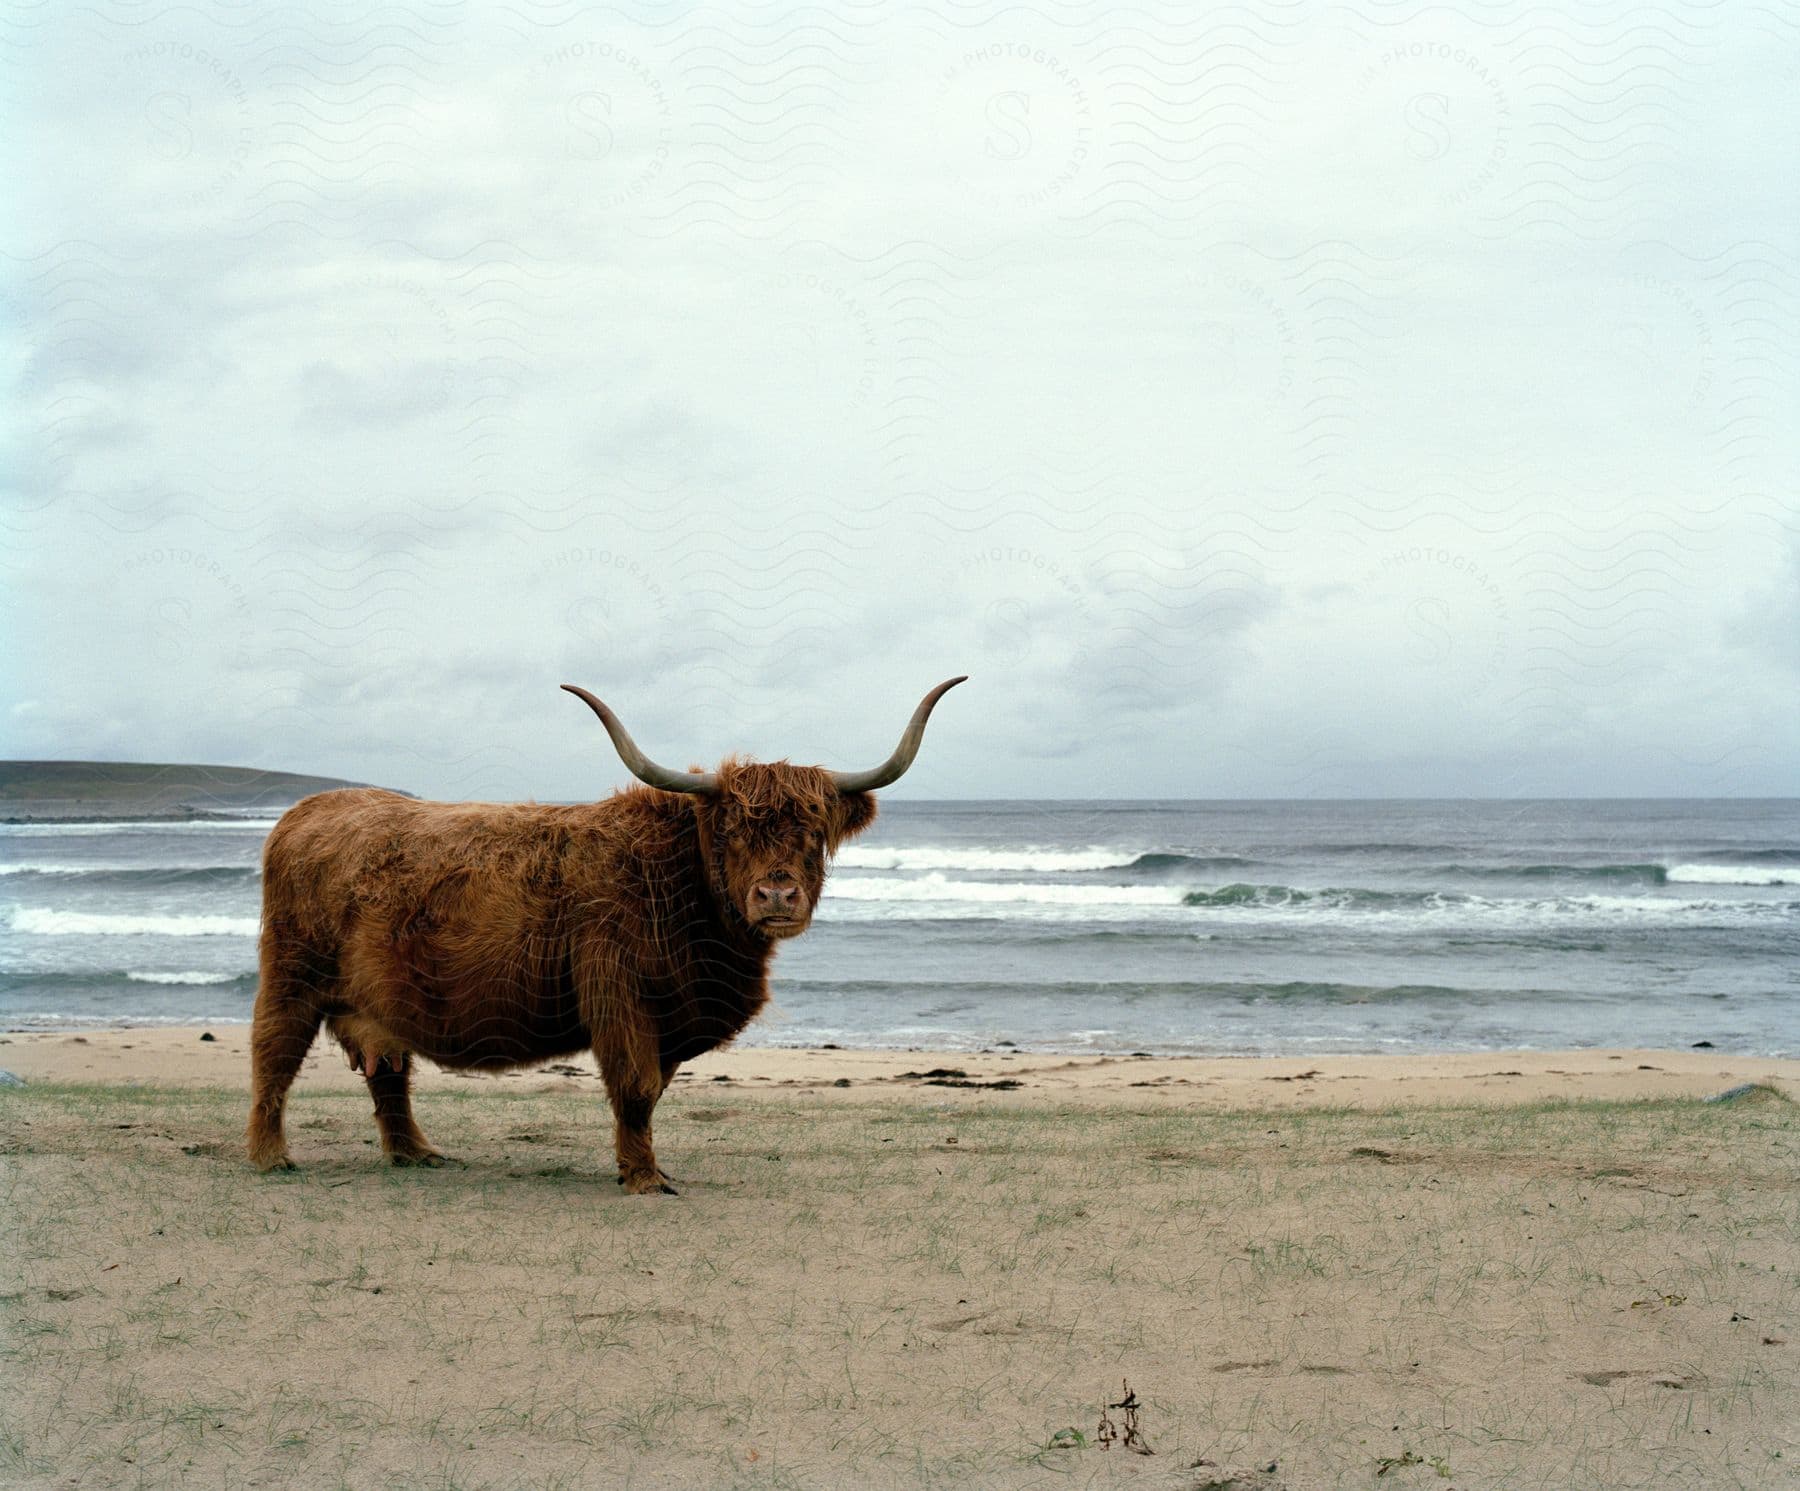 A brown highland cow standing on the beach sand